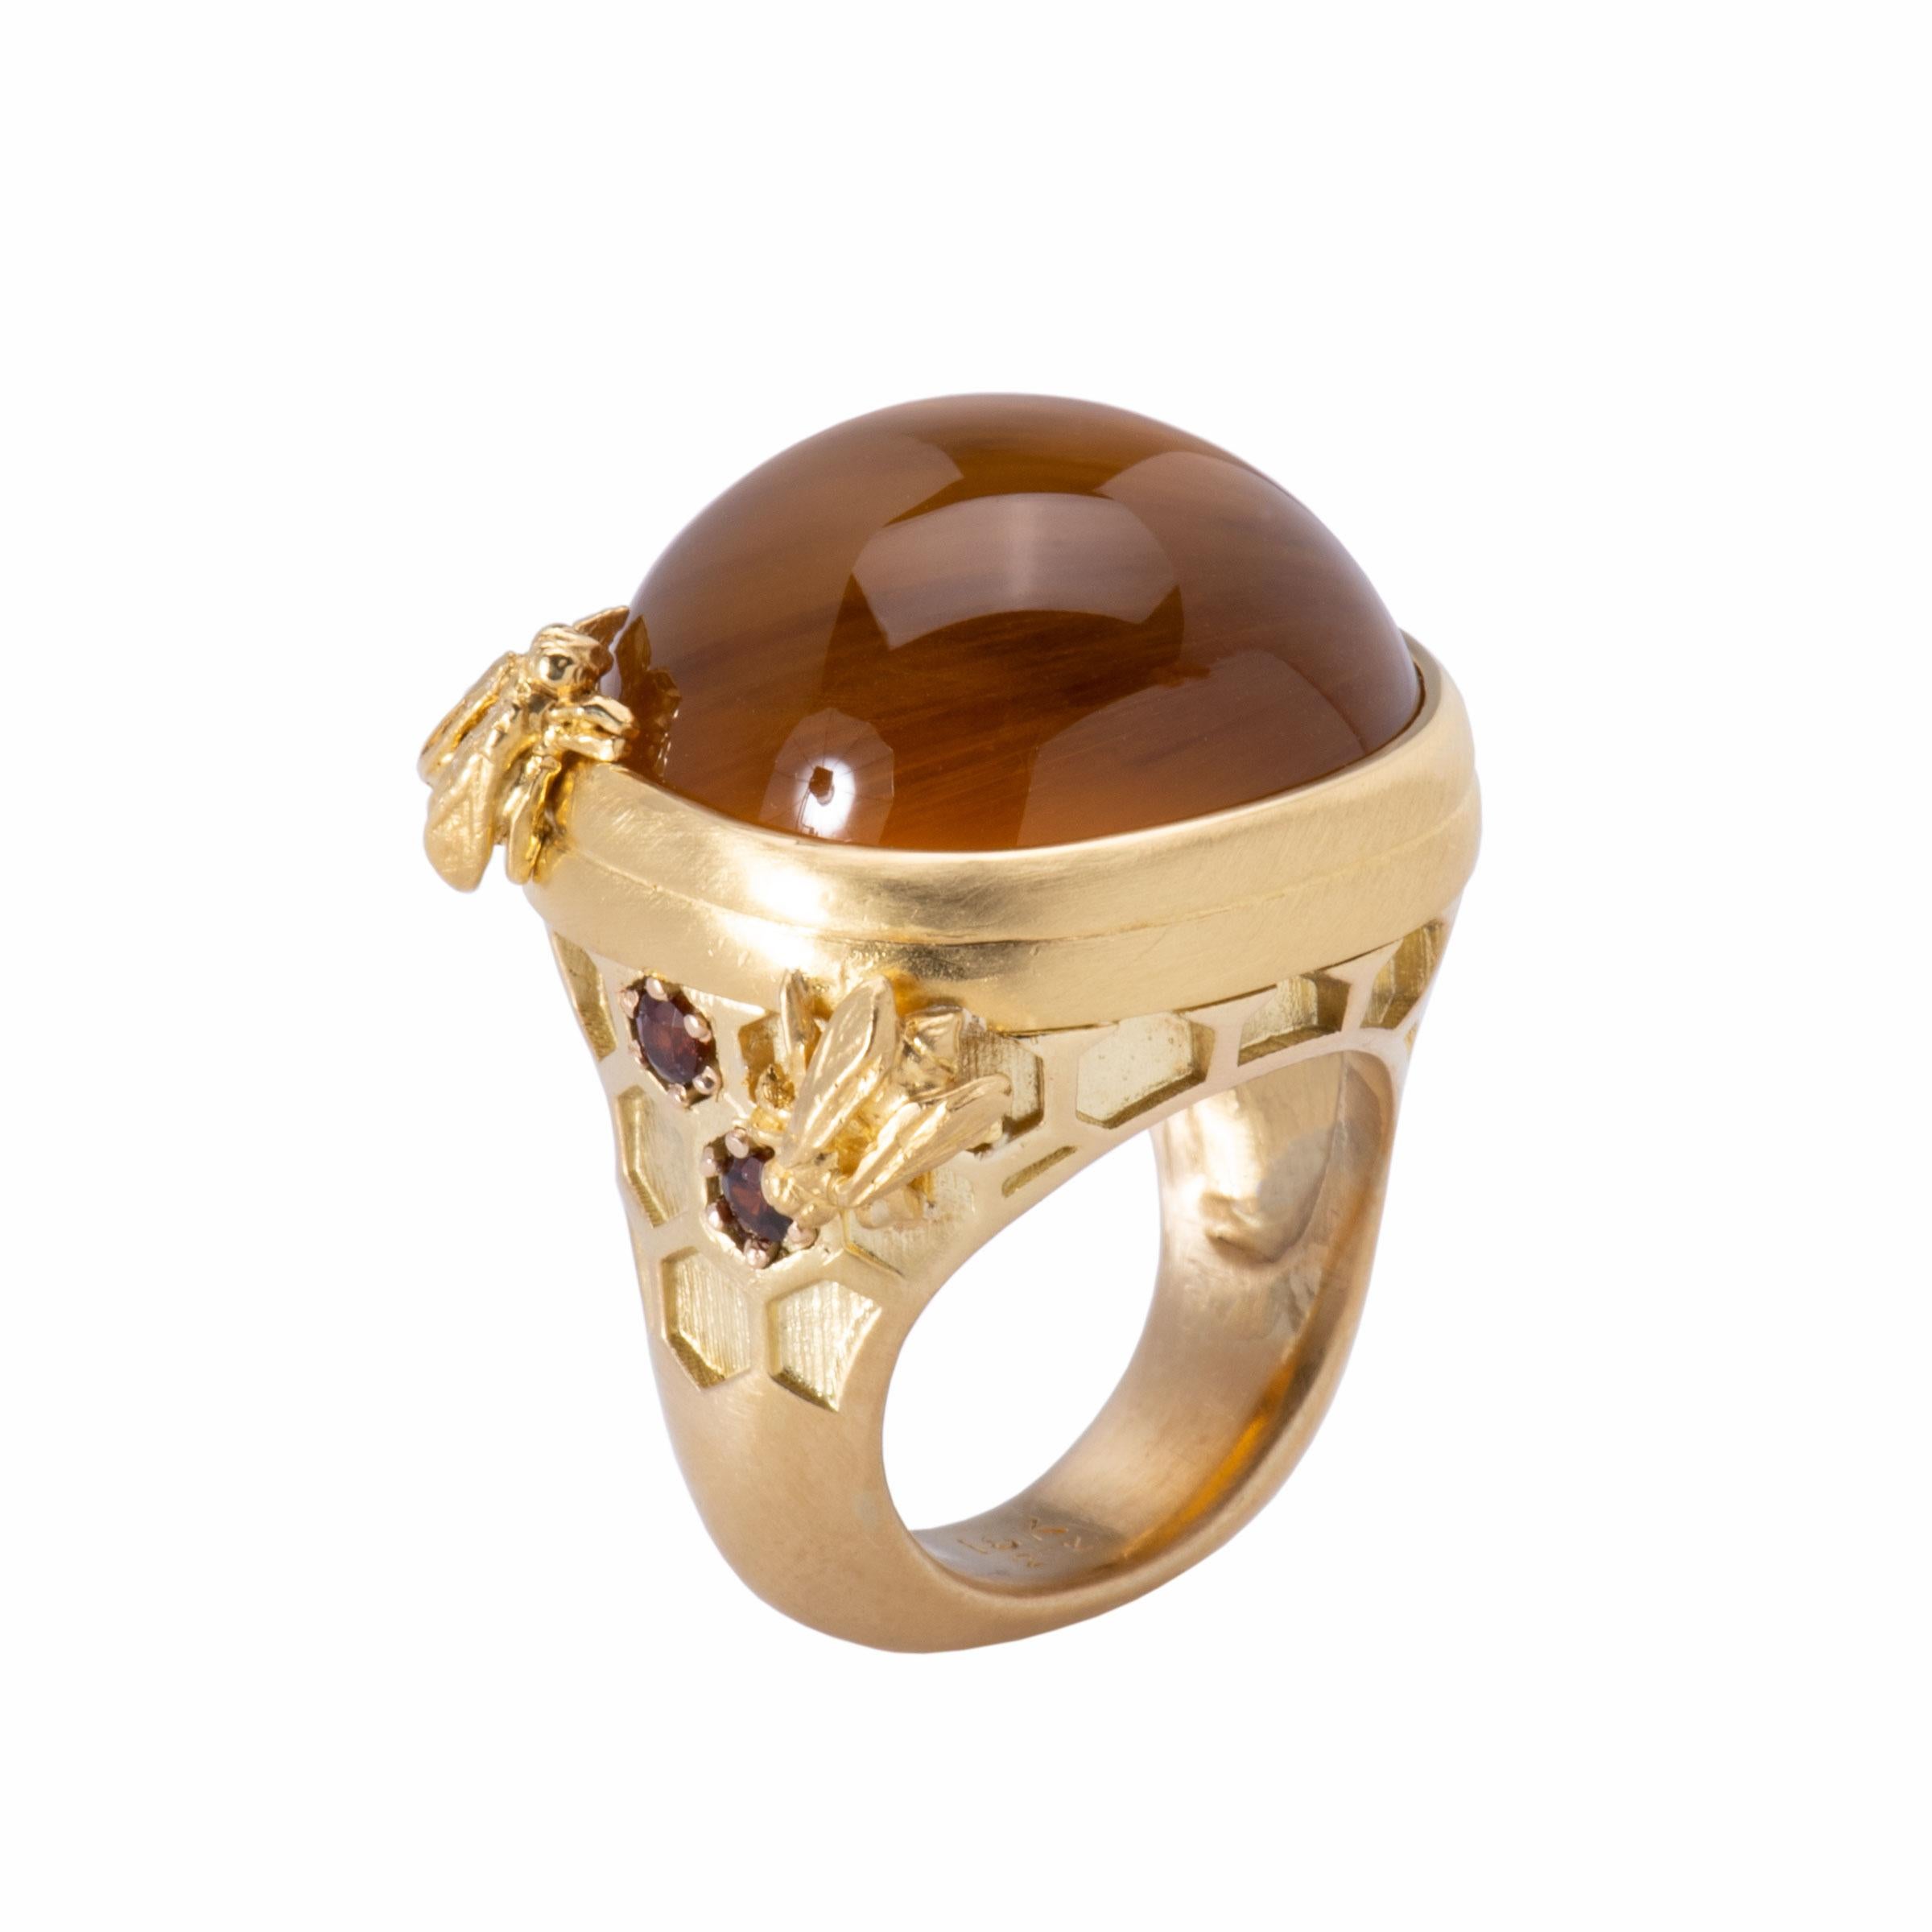 A spectacular 51.46ct honey colored golden beryl is the focus of this intricate ring. The shanks and setting are embellished with honeycomb patterns and three buzzing bees sip at the edges. Created in 22k gold and 18k gold, 2 andradite garnets